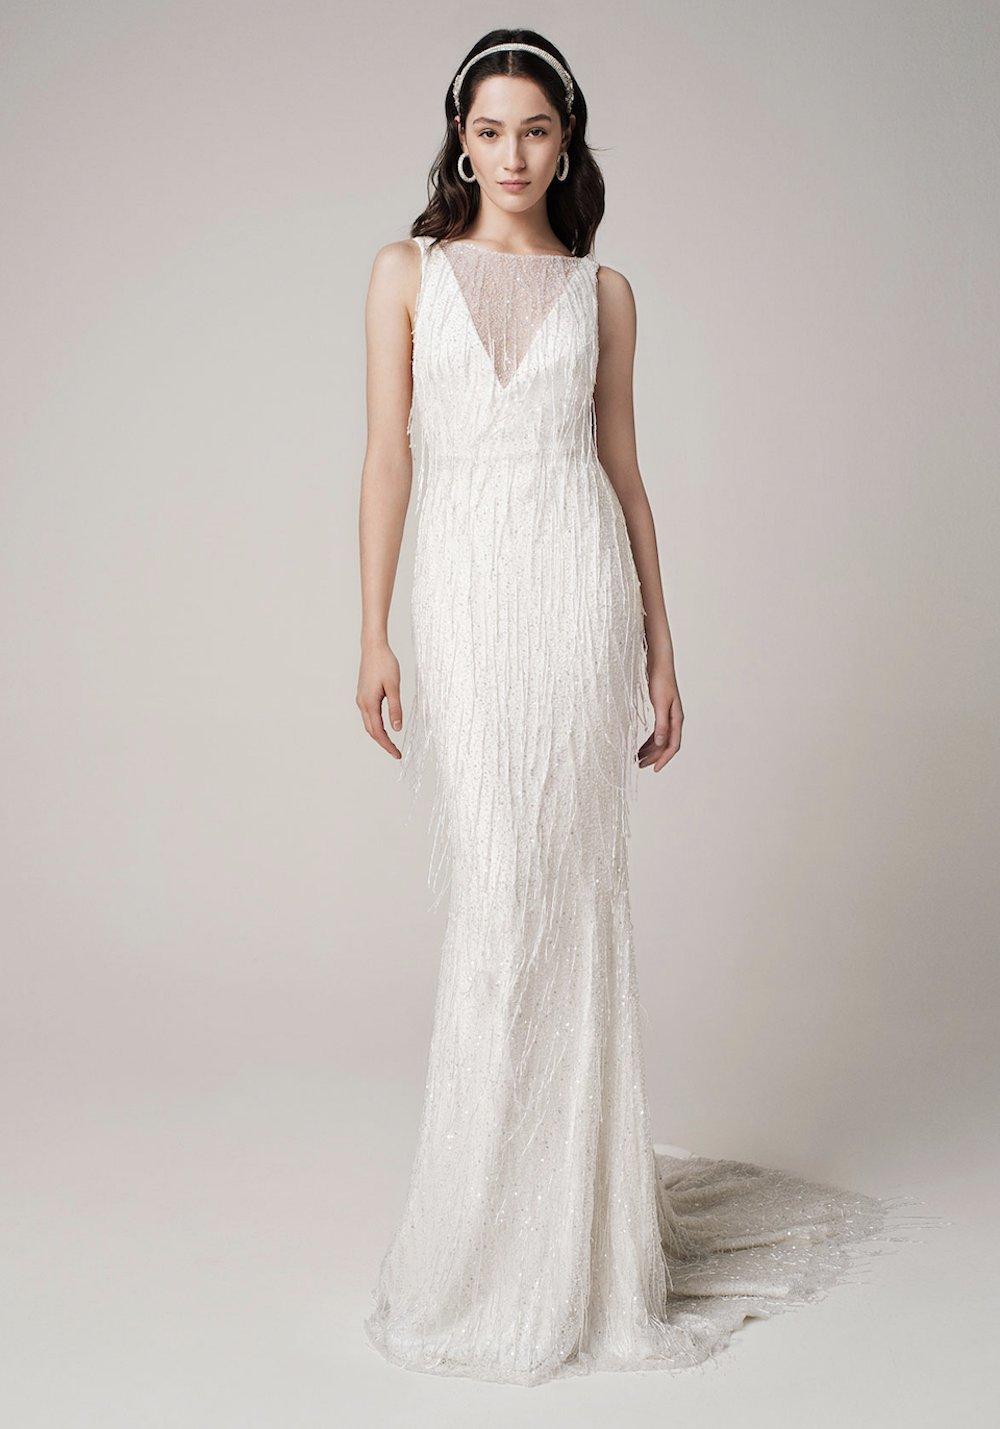 1920s Wedding Dresses: The Best Styles for Modern and Vintage Loving Brides  